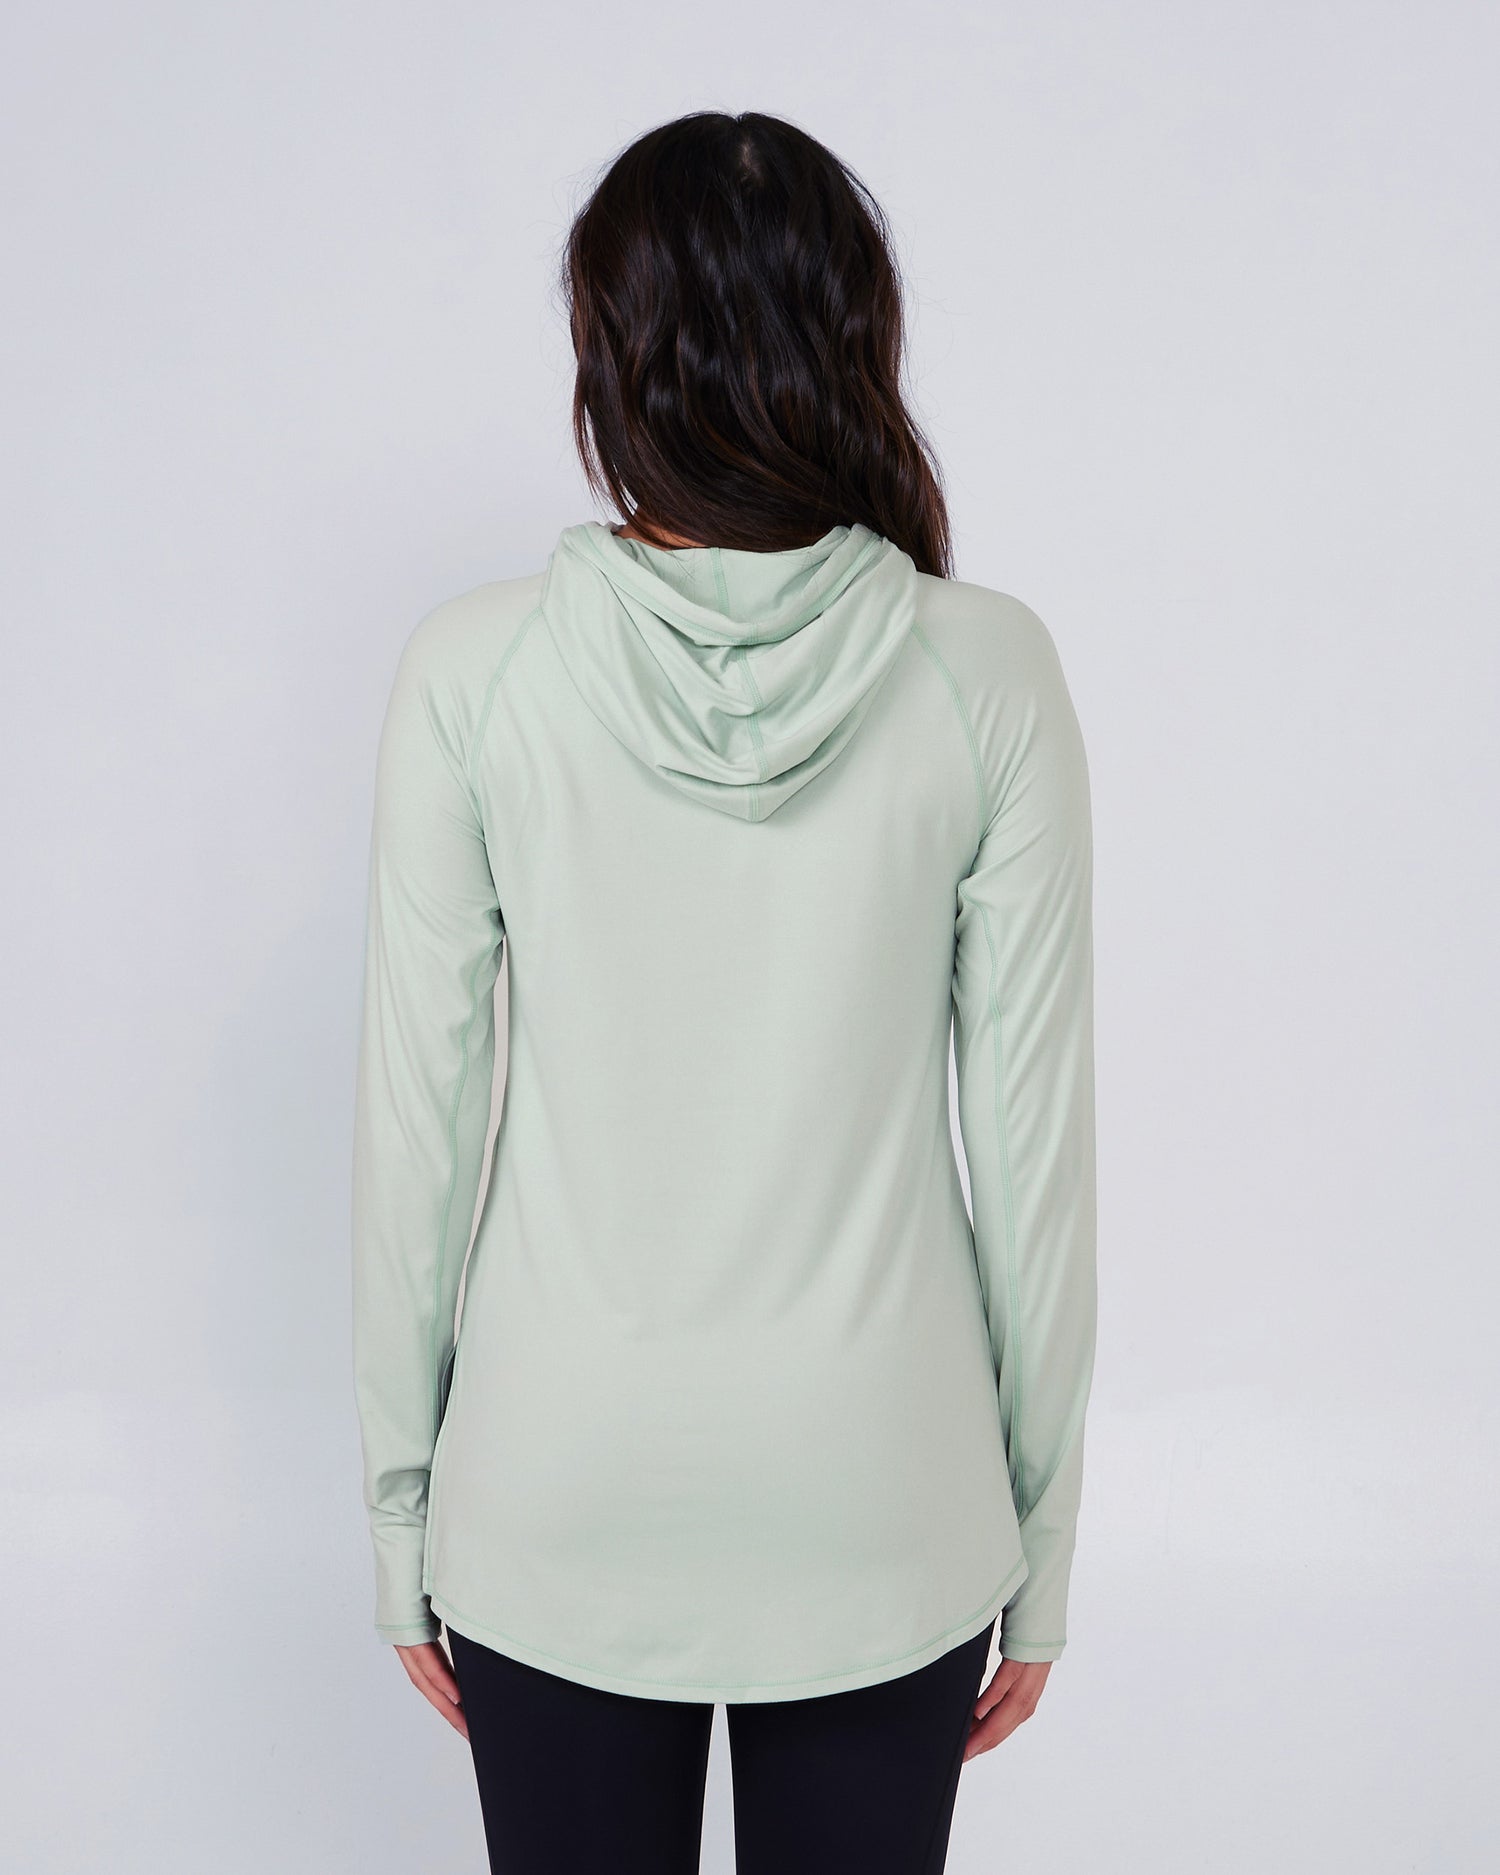 back view of Thrill Seekers Jade Hooded Sunshirt